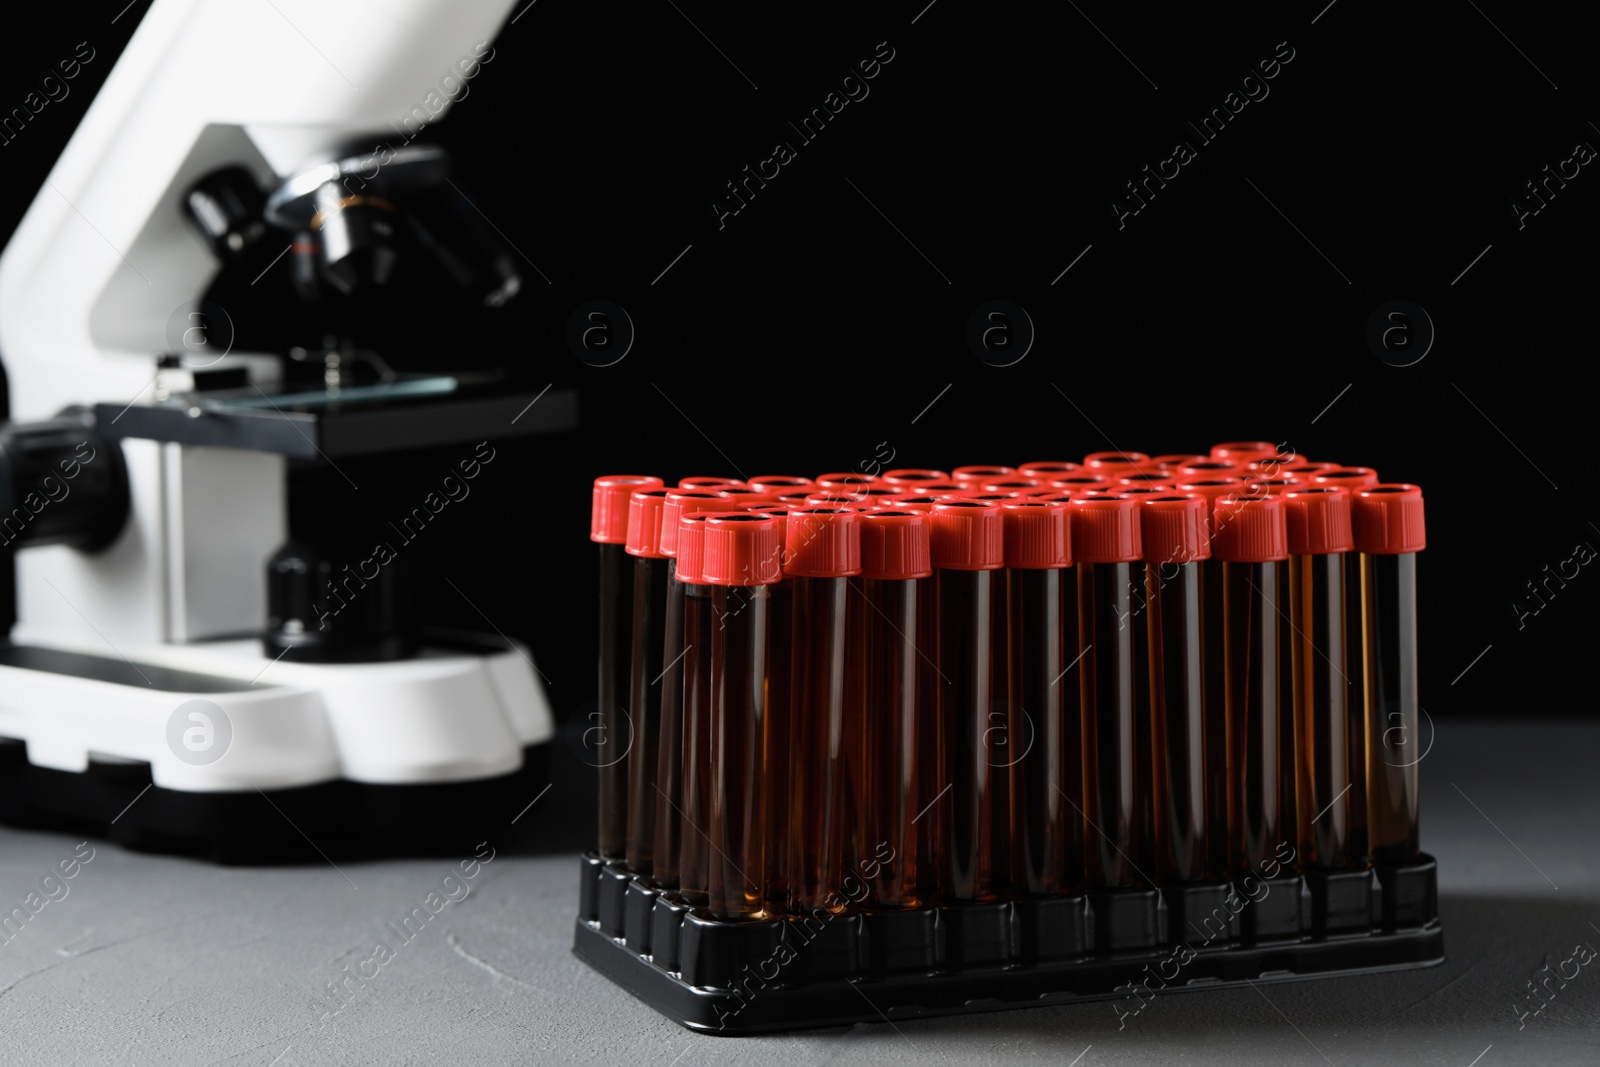 Photo of Test tubes with brown liquid in stand on grey table against black background